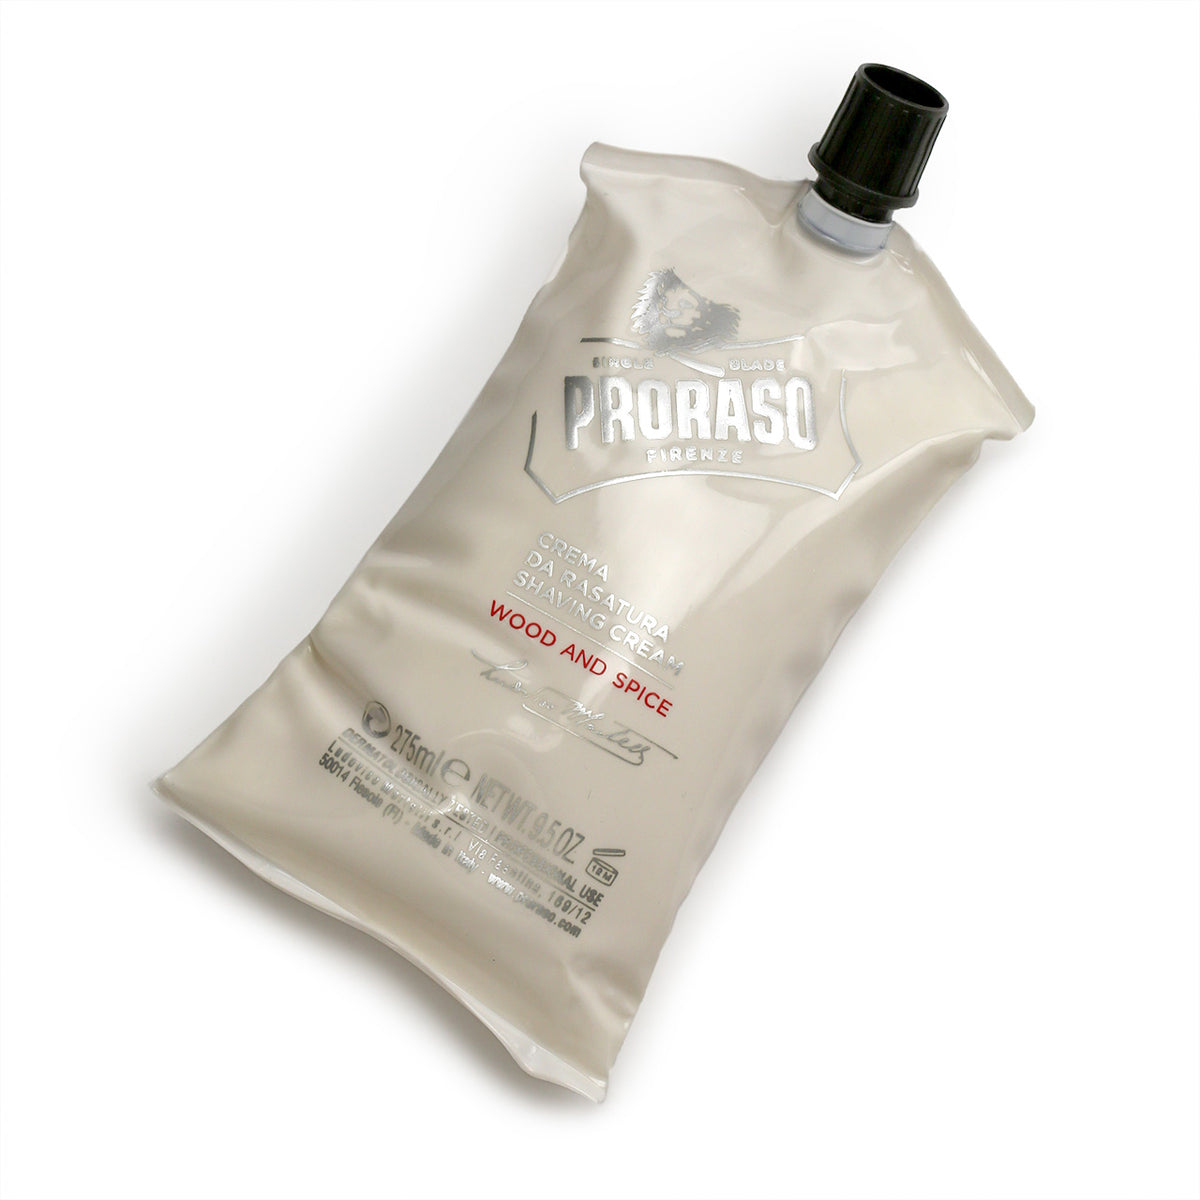 The pouch of Proraso Wood &amp; Spice shaving cream has a screw cap spout